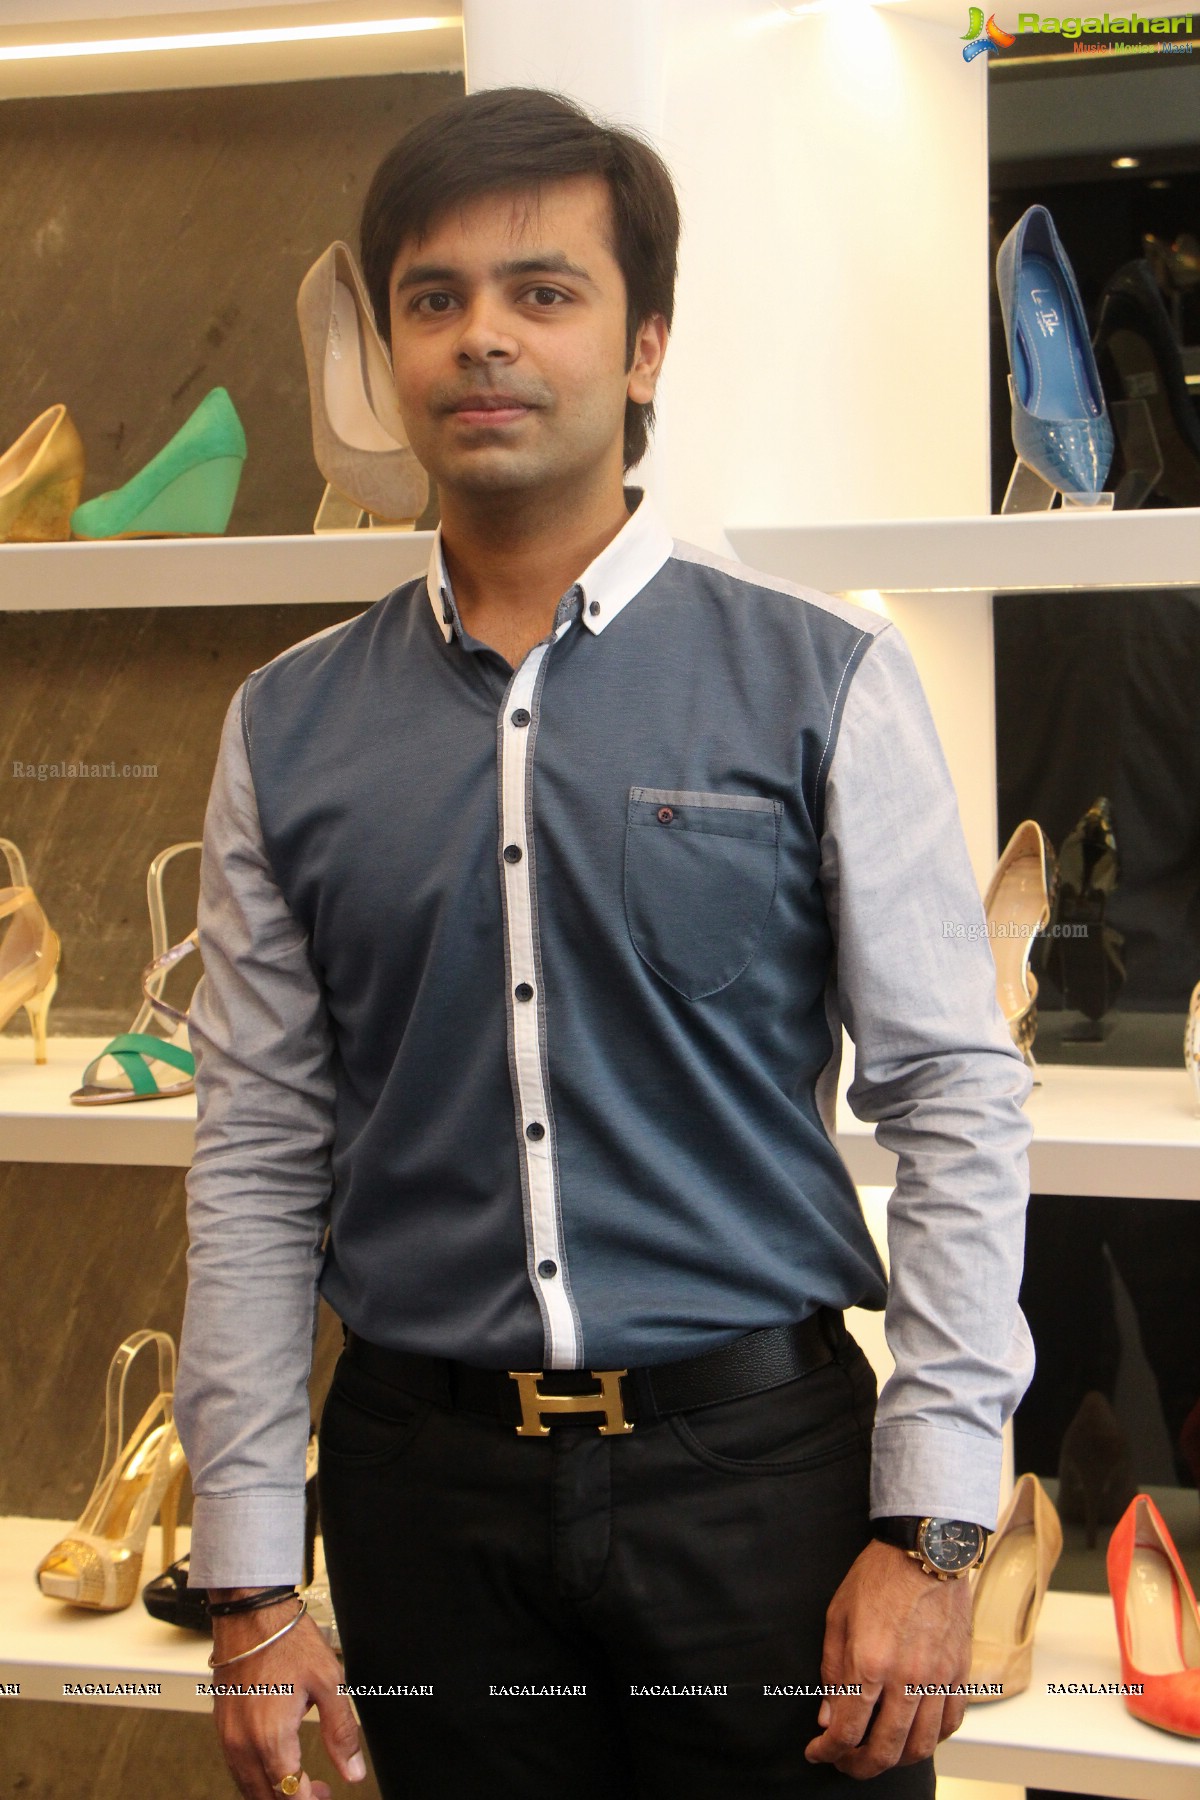 Protoes Store Launch, Hyderabad